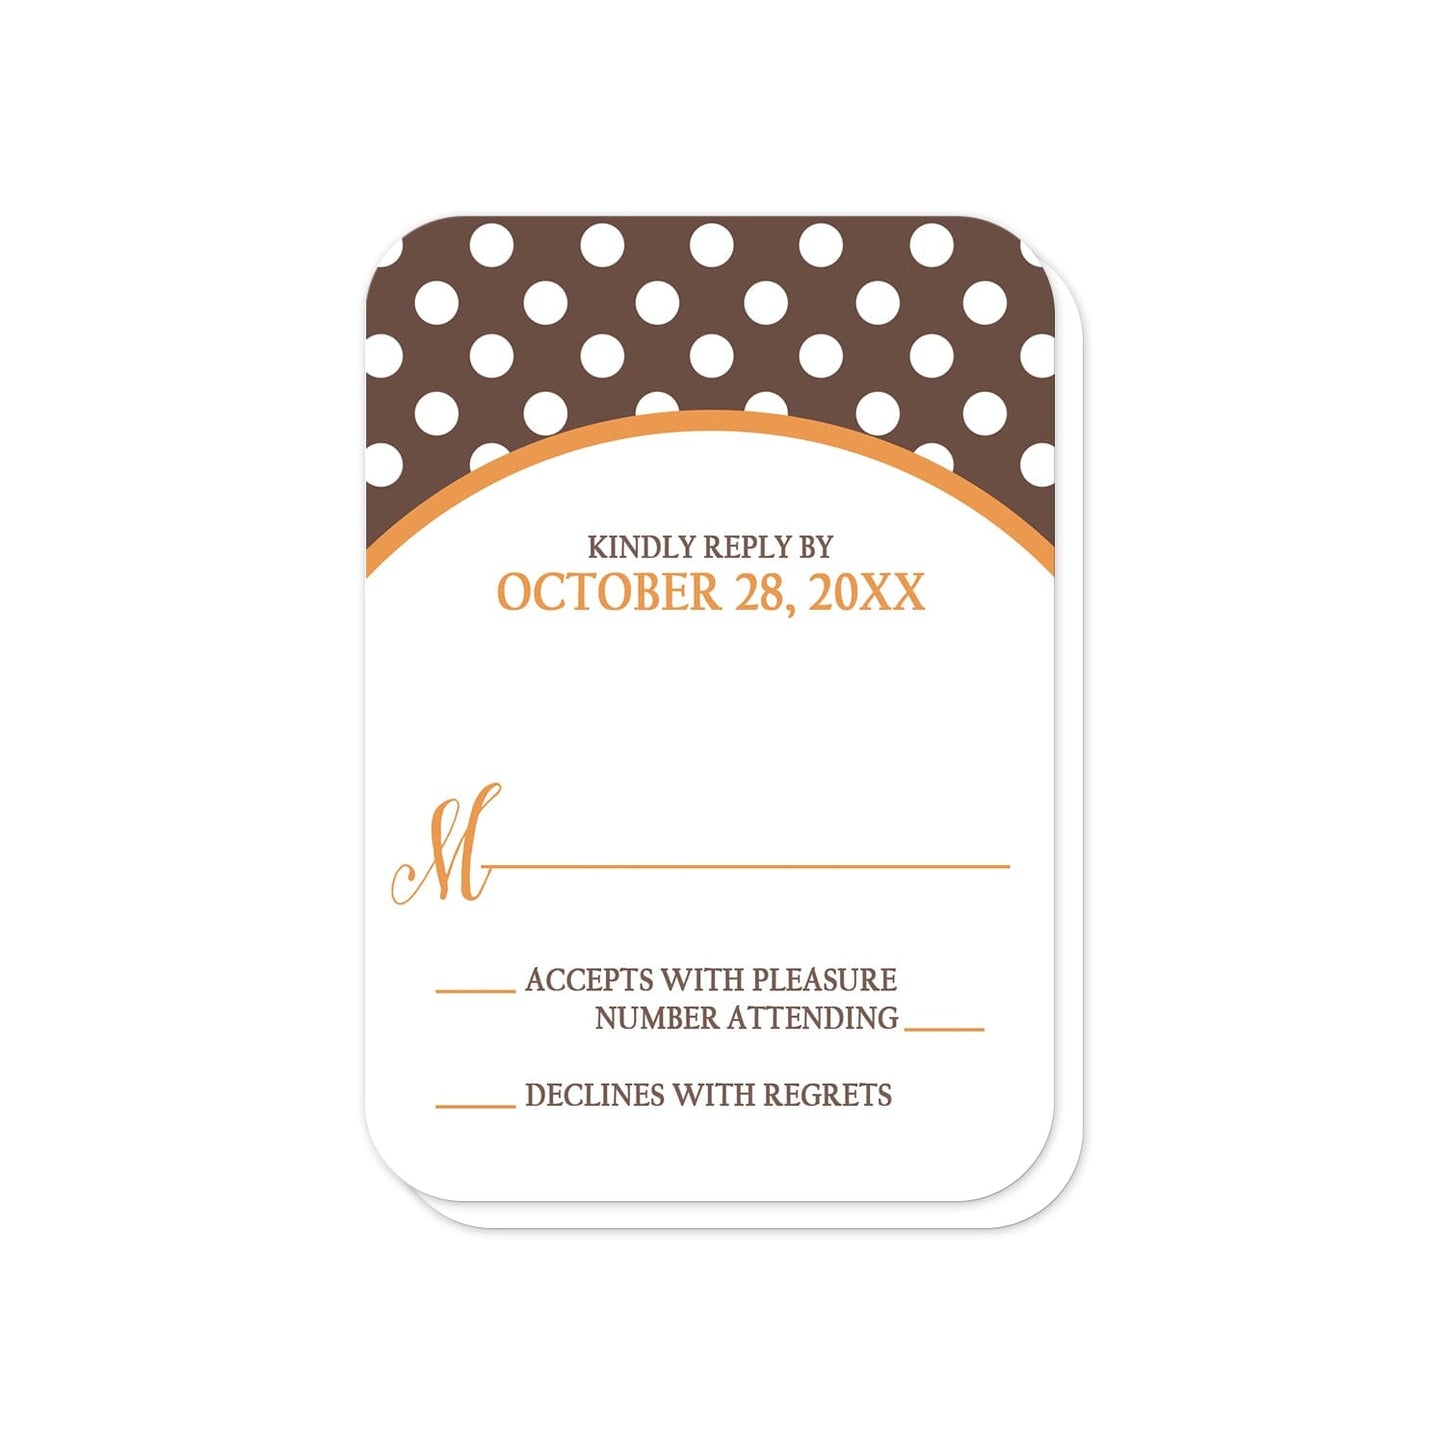 Orange Brown Polka Dot RSVP Cards (with rounded corners) at Artistically Invited.